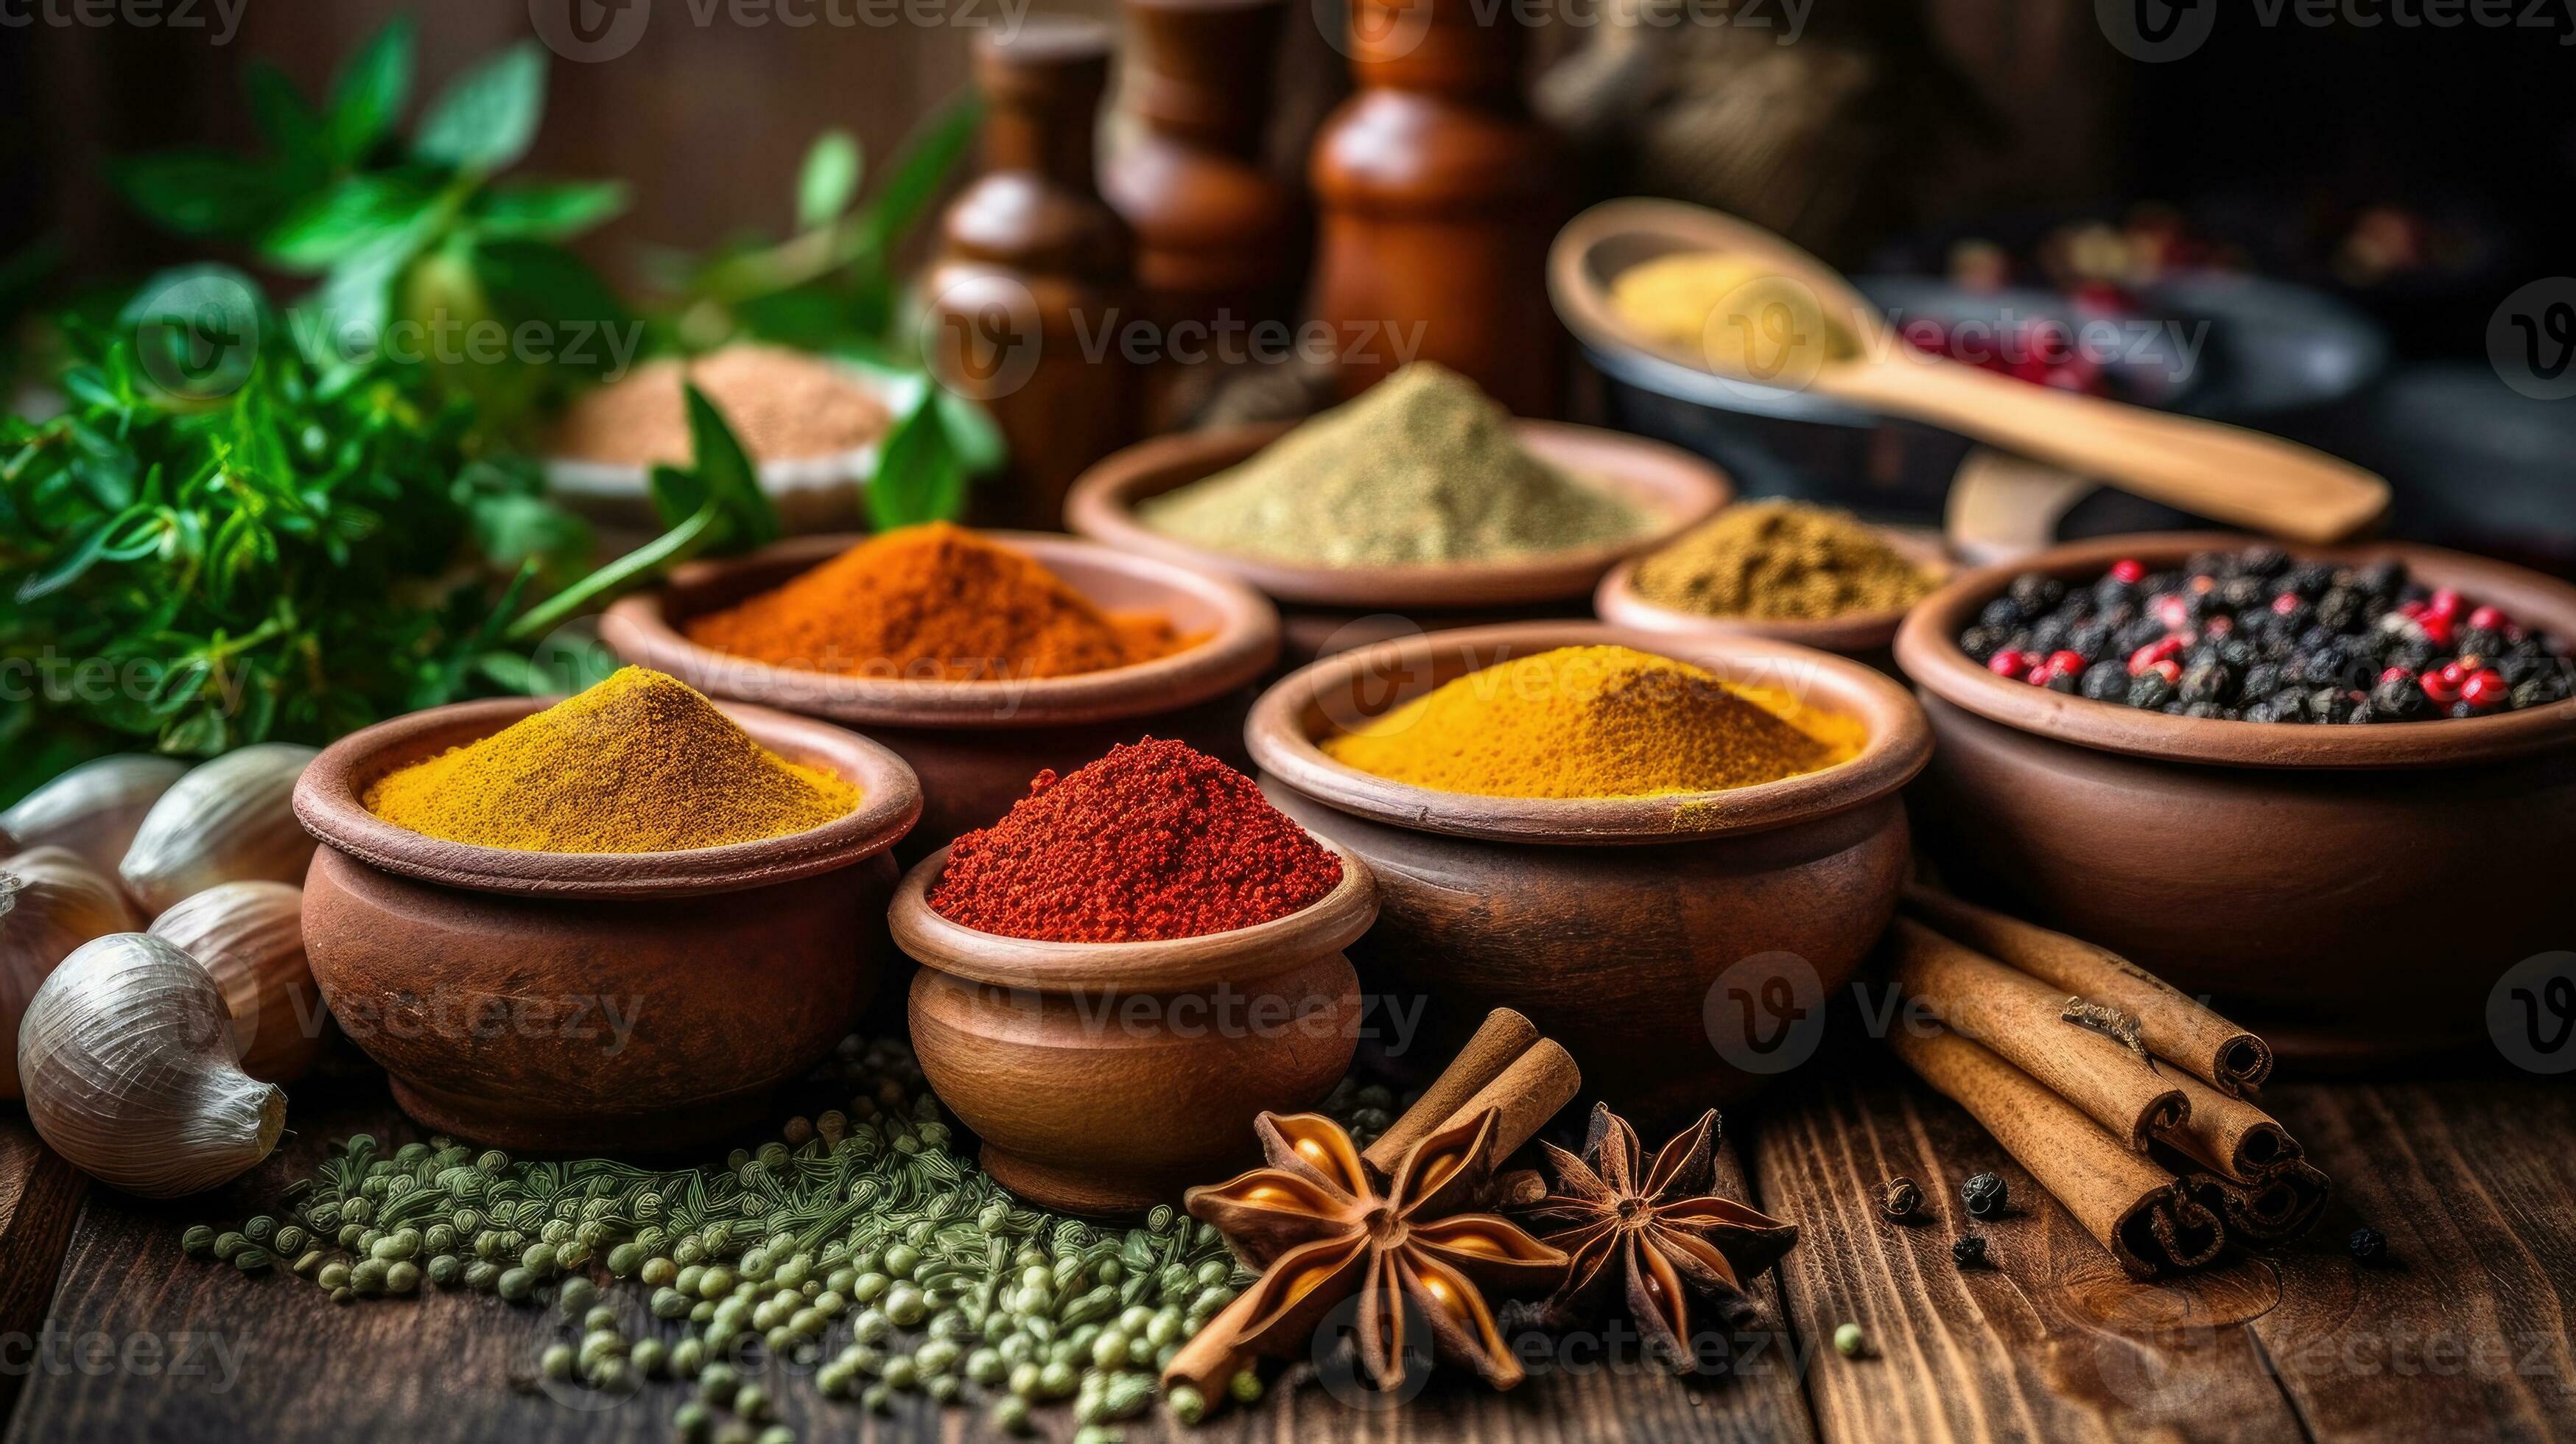 https://static.vecteezy.com/system/resources/previews/028/340/523/large_2x/set-of-spices-and-herbs-for-cooking-small-bowls-with-colorful-seasonings-and-spices-basil-pepper-saffron-salt-paprika-turmeric-on-rustic-wooden-plank-table-background-generative-ai-photo.jpeg